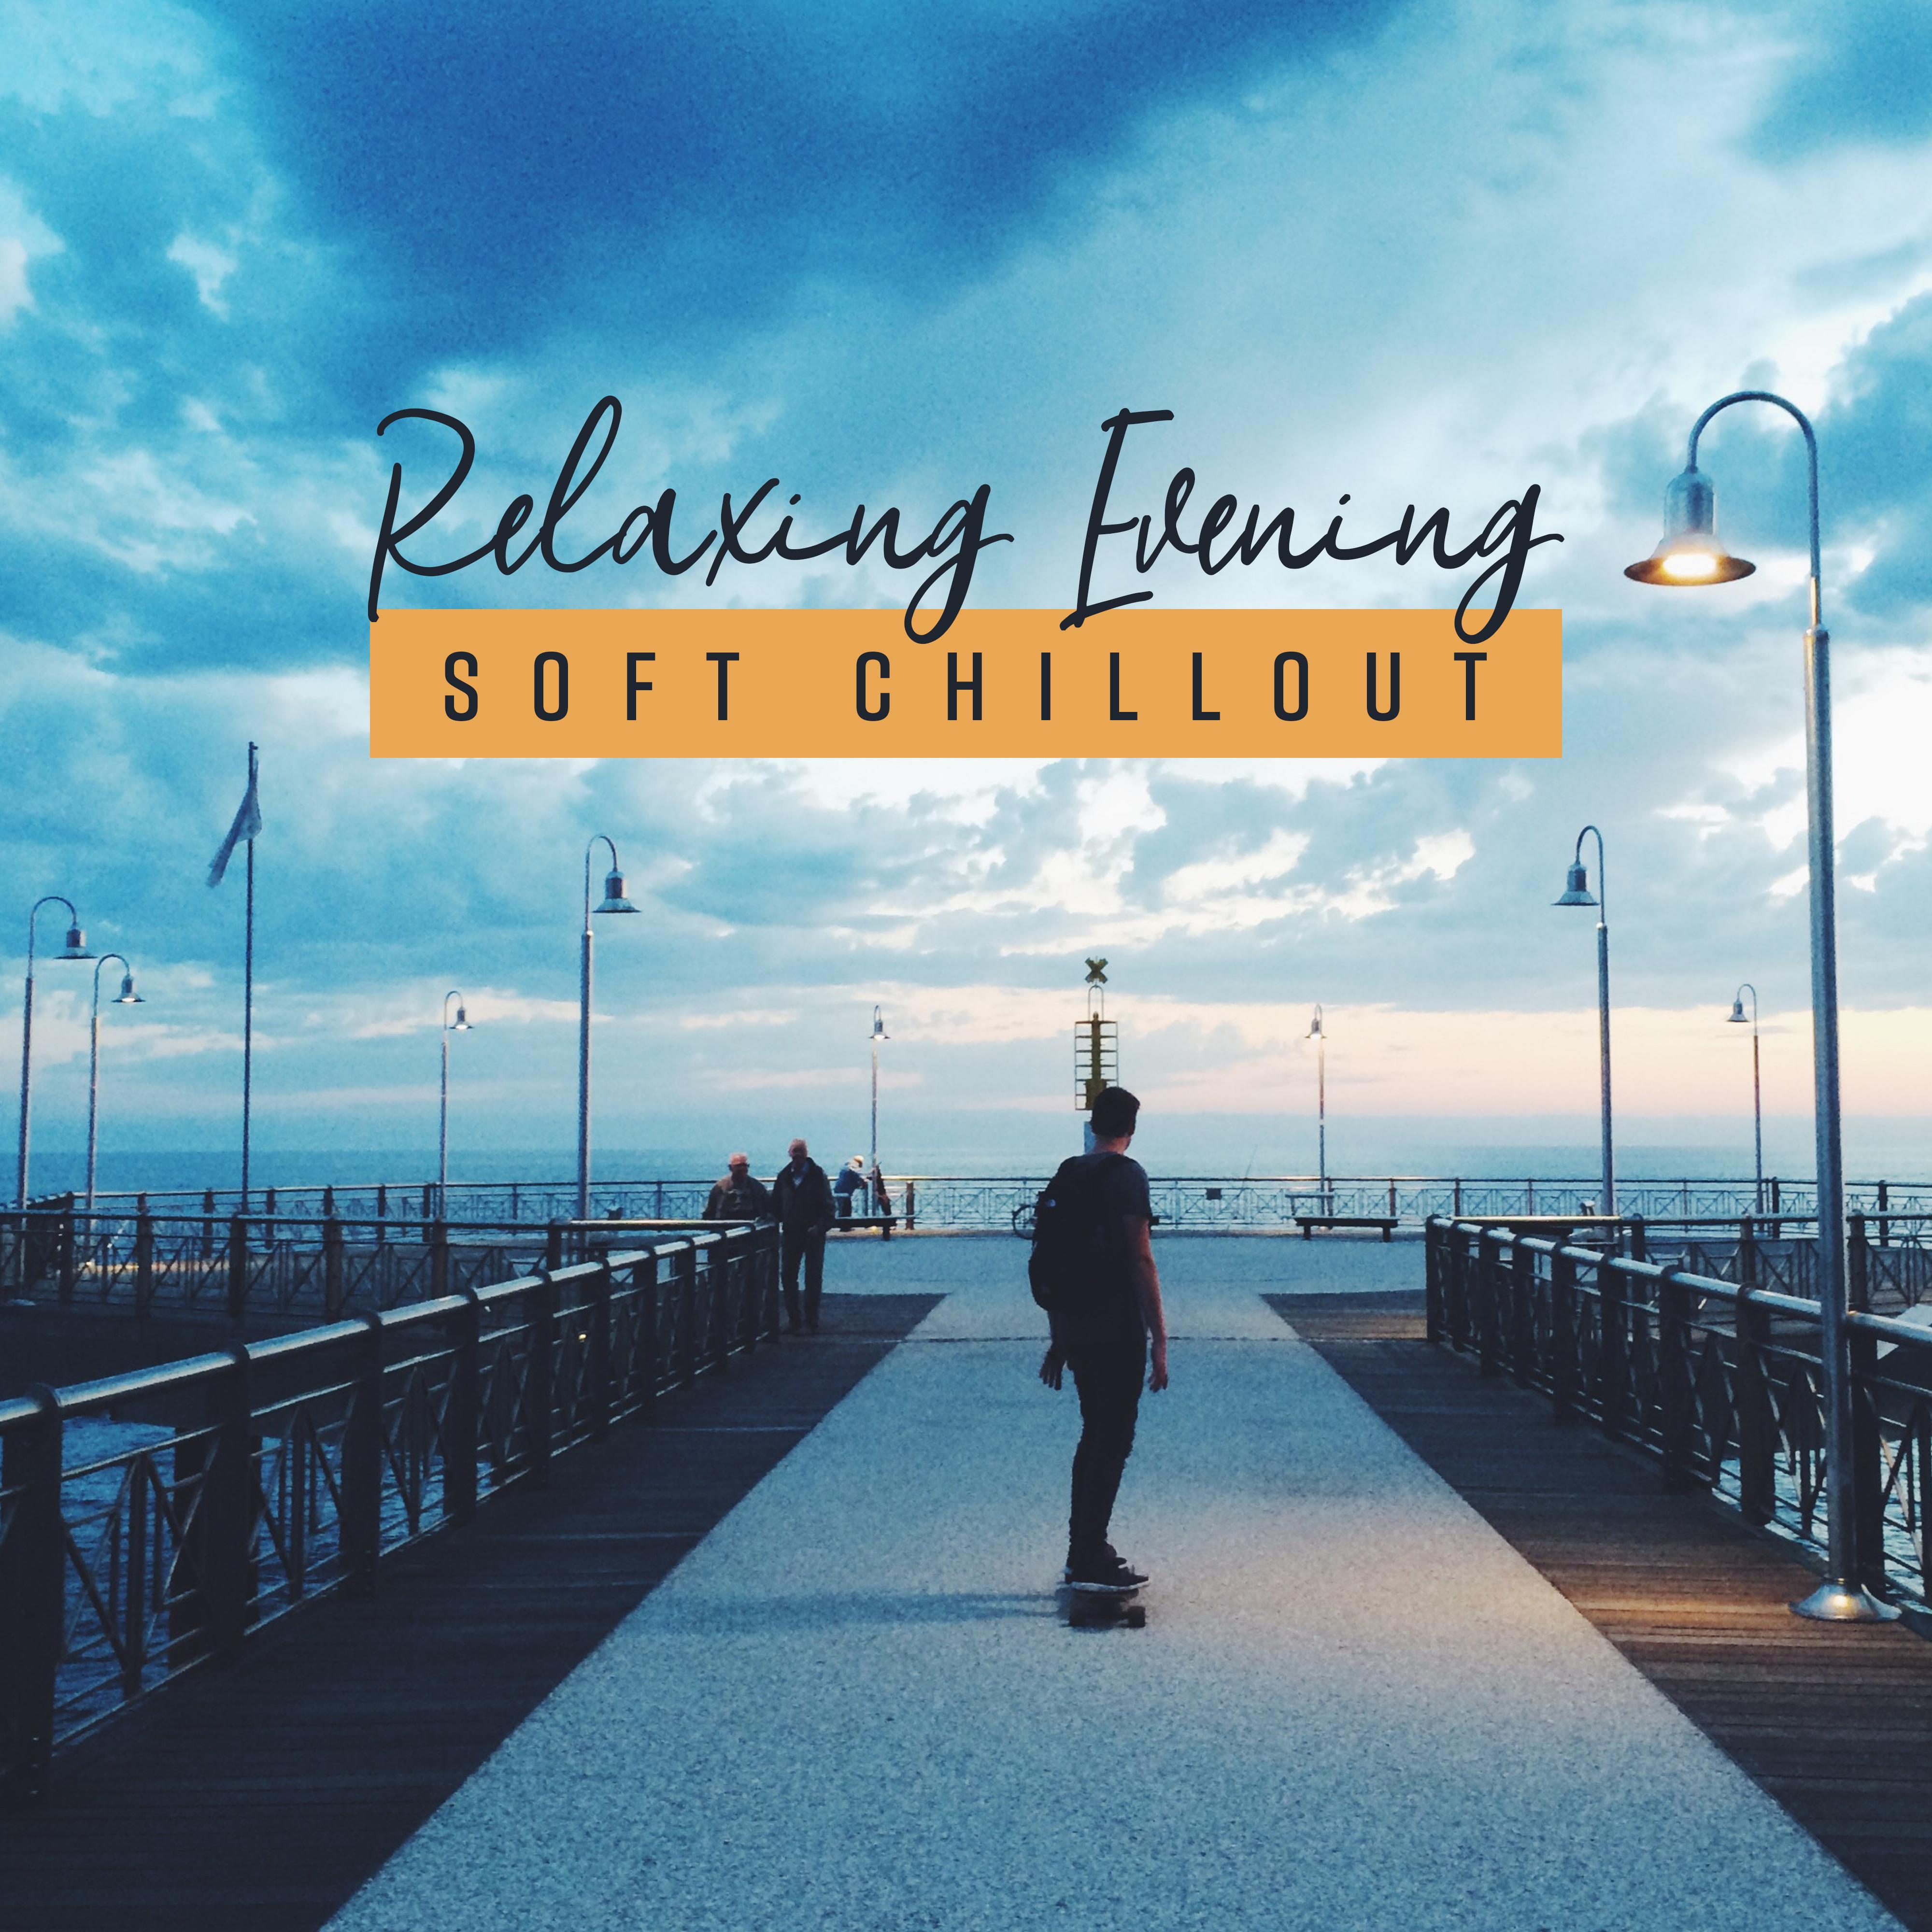 Relaxing Evening Soft Chillout  Smooth Chill Out 2019 Music Compilation for Relax After Long Day, Slow Down, Keep Calm, Stress Relief Melodies